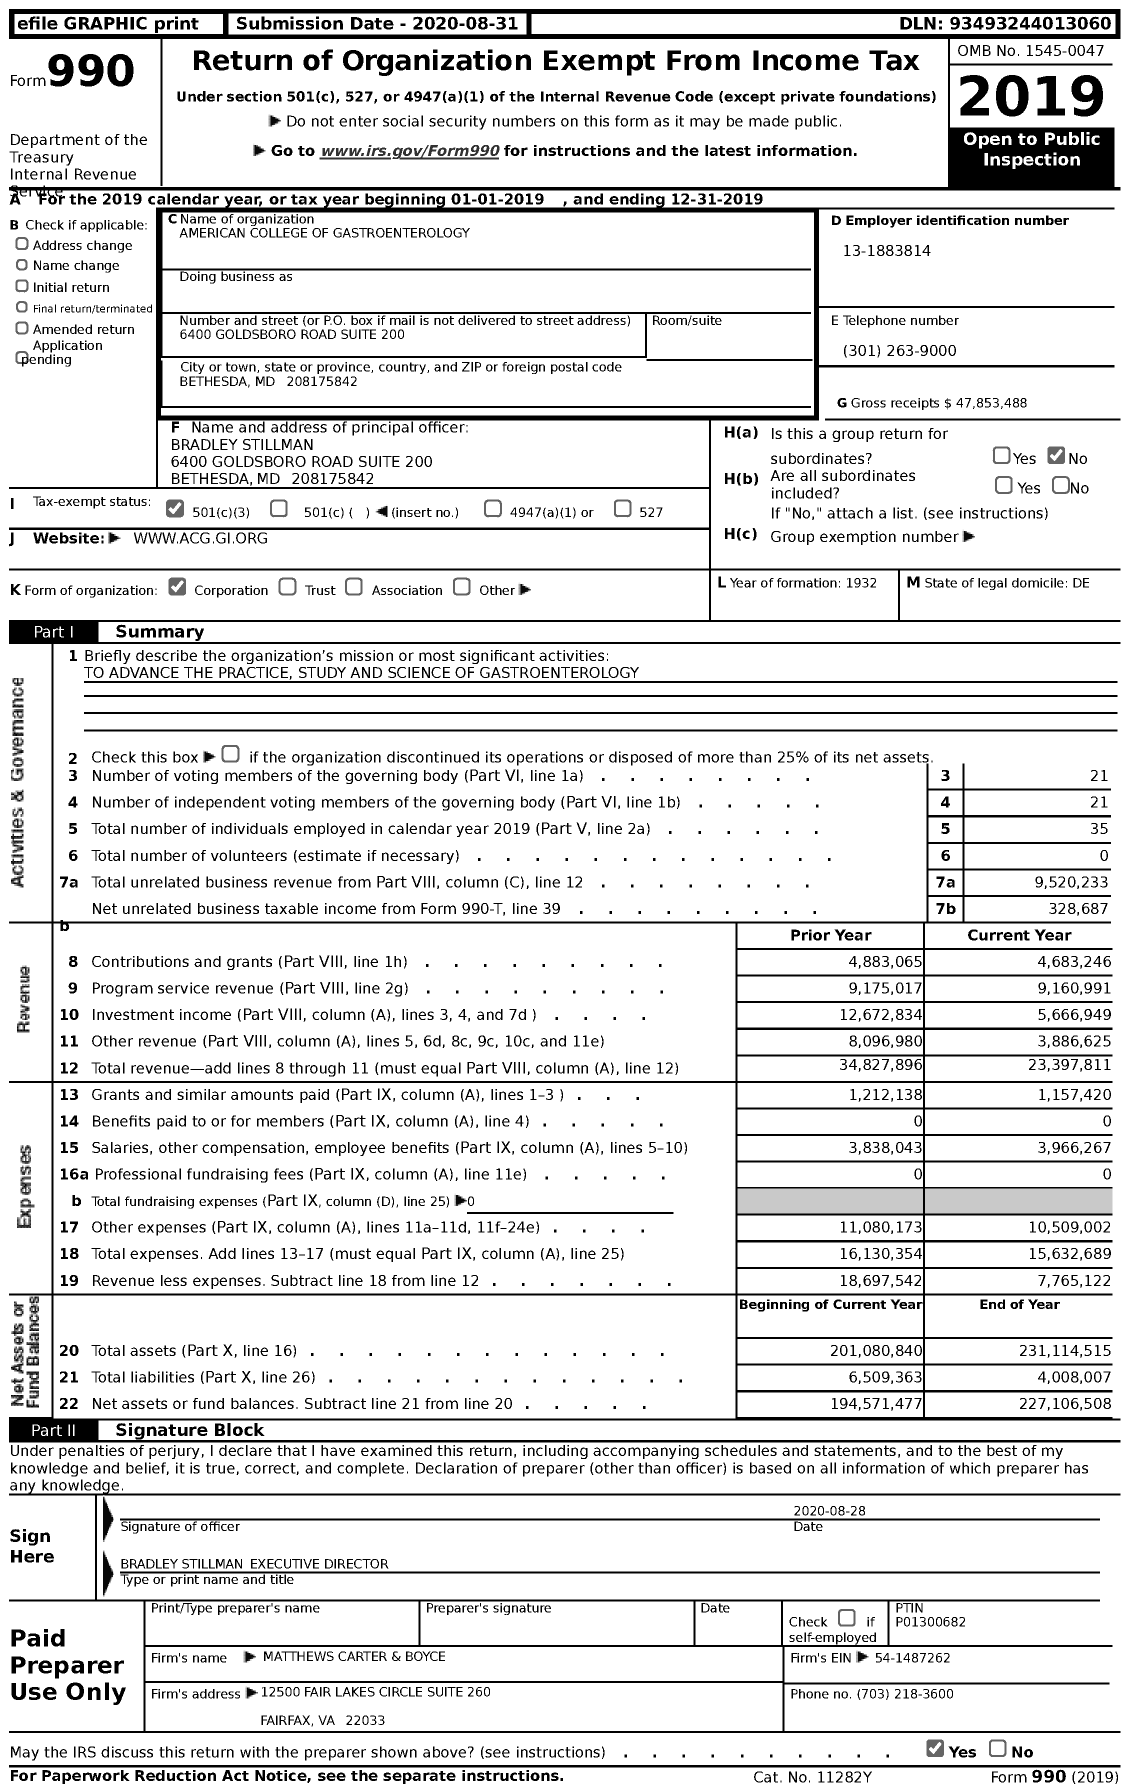 Image of first page of 2019 Form 990 for American College of Gastroenterology (ACG)